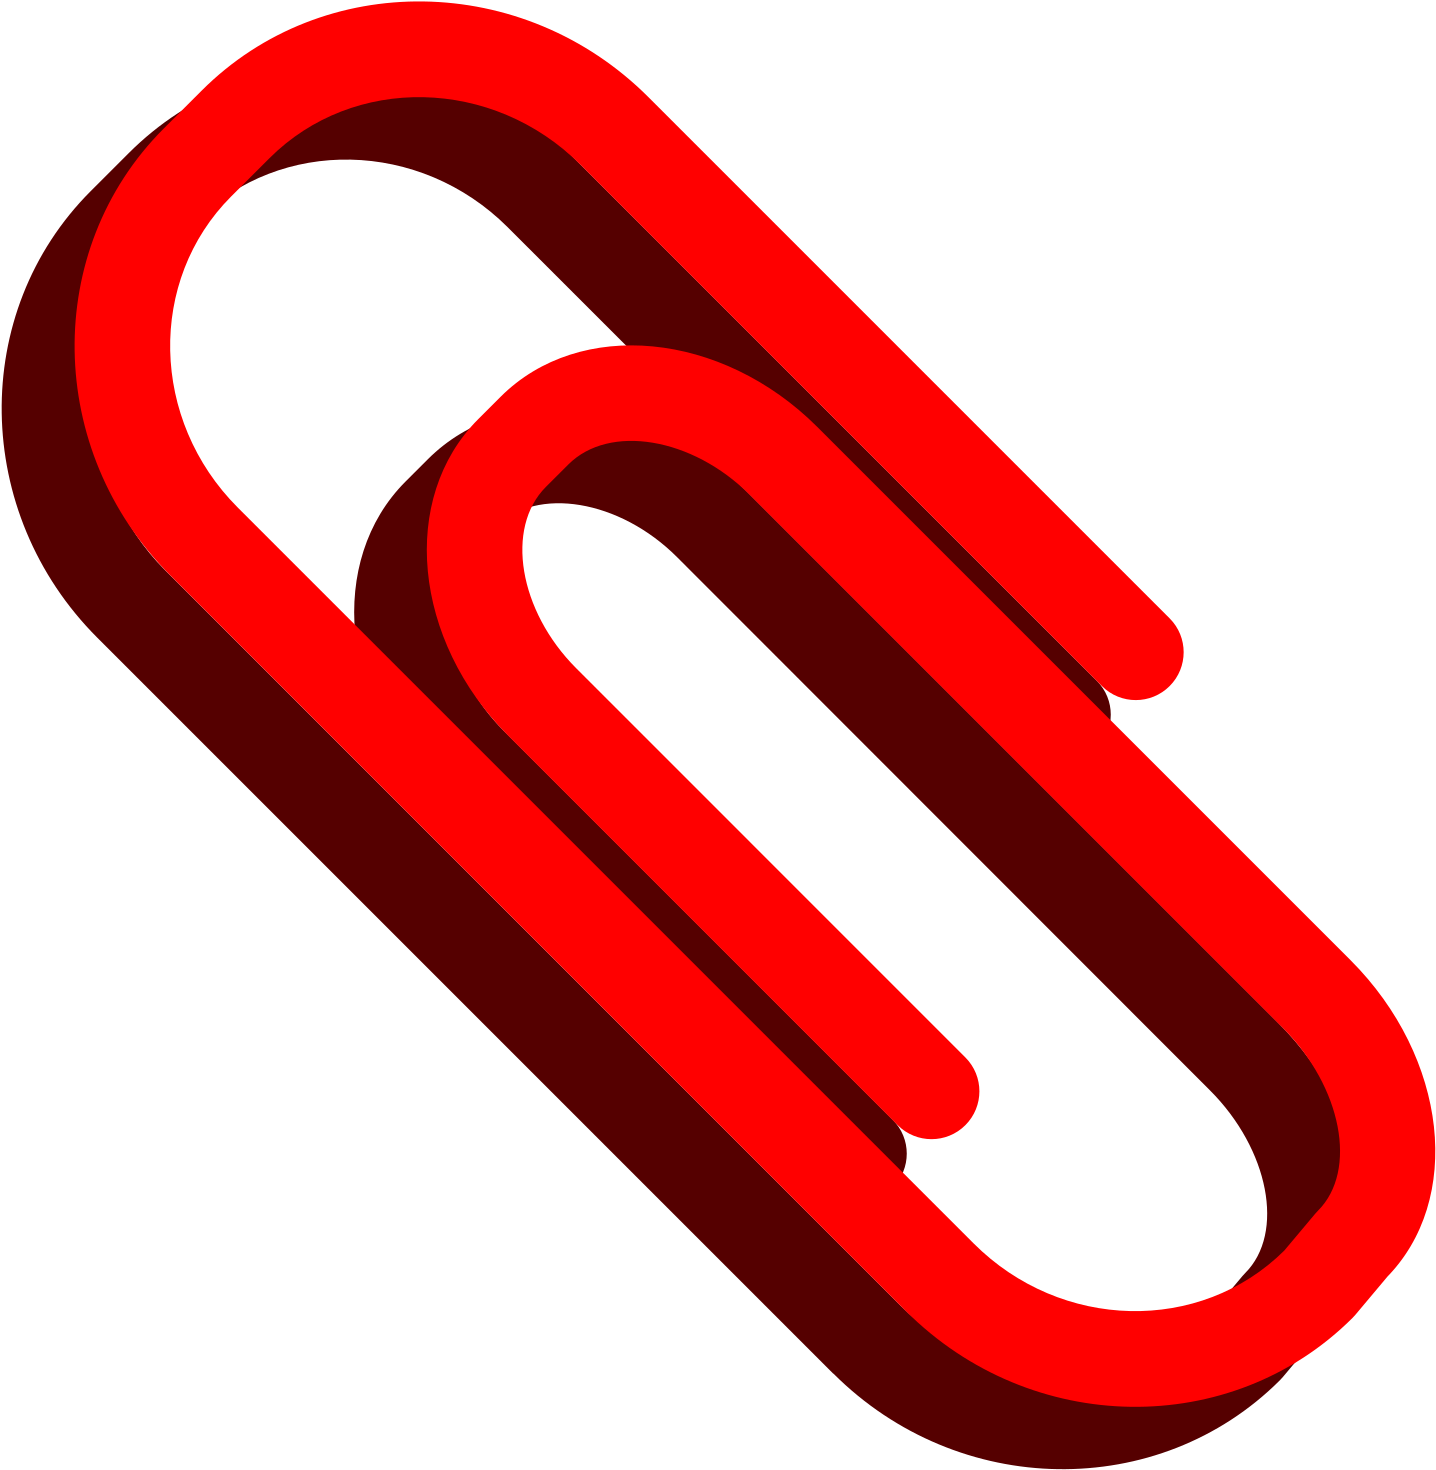 A Red Paper Clip On A Black Background